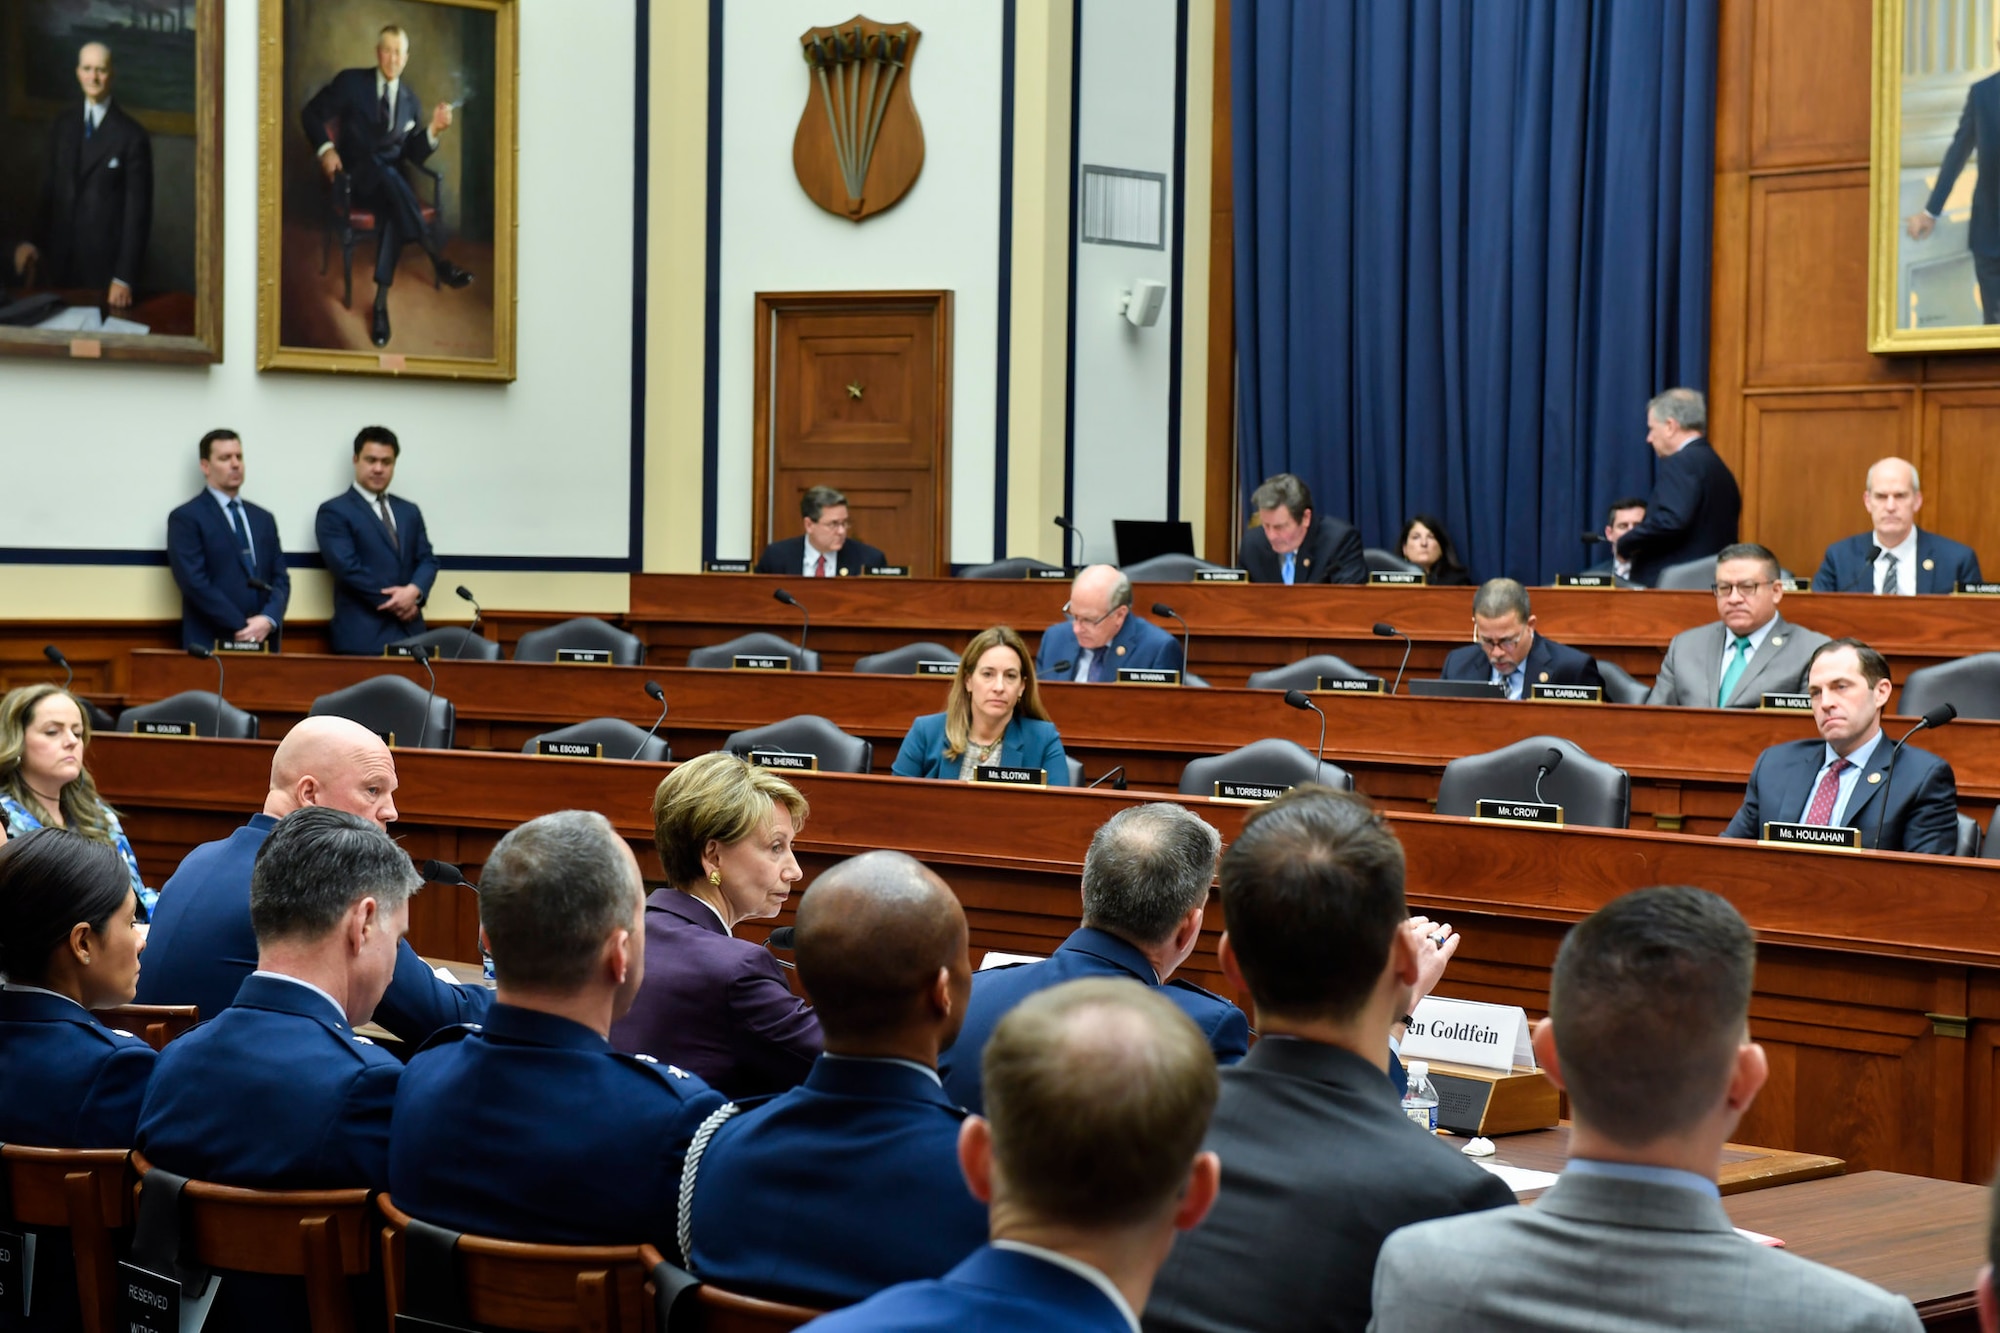 Air Force Chief of Staff Gen. David L. Goldfein, Department of the Air Force Secretary Barbara M. Barrett and Chief of Space Operations Gen. John W. Raymond testify before the House Armed Services Committee in Washington, D.C., March 4, 2020. (U.S. Air Force photo by Wayne Clark)